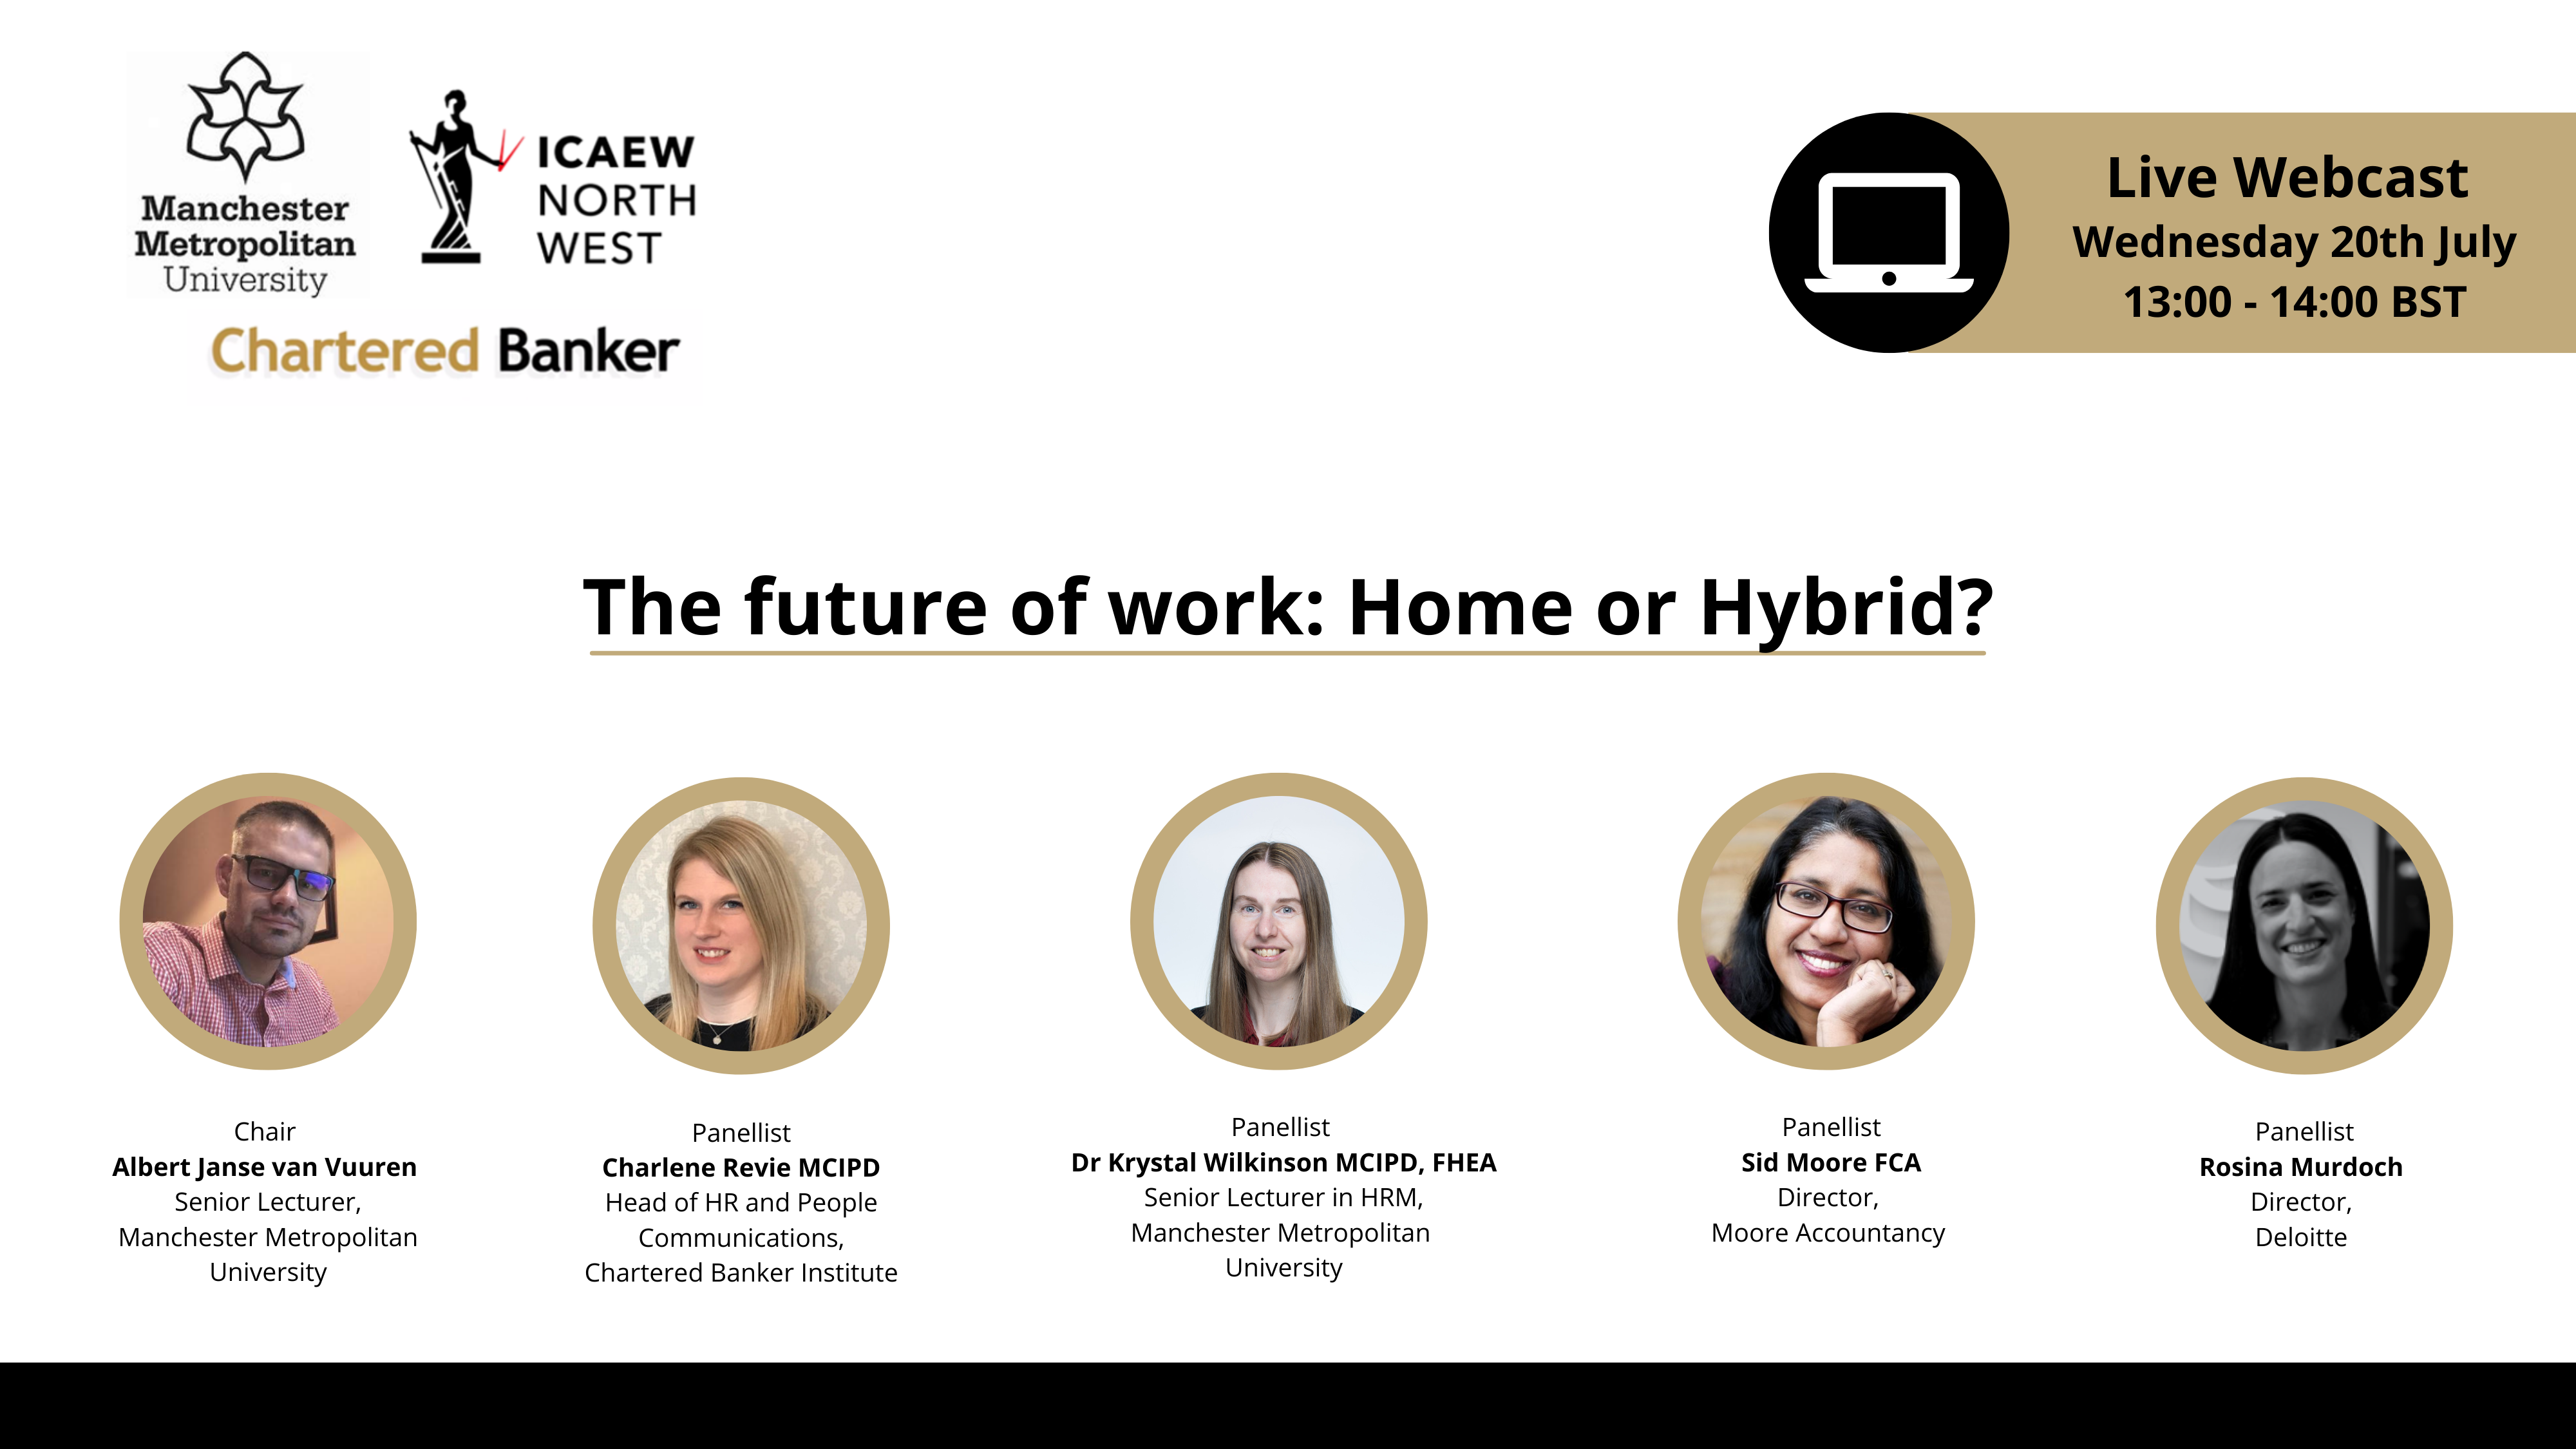 The future of work: Home or Hybrid?